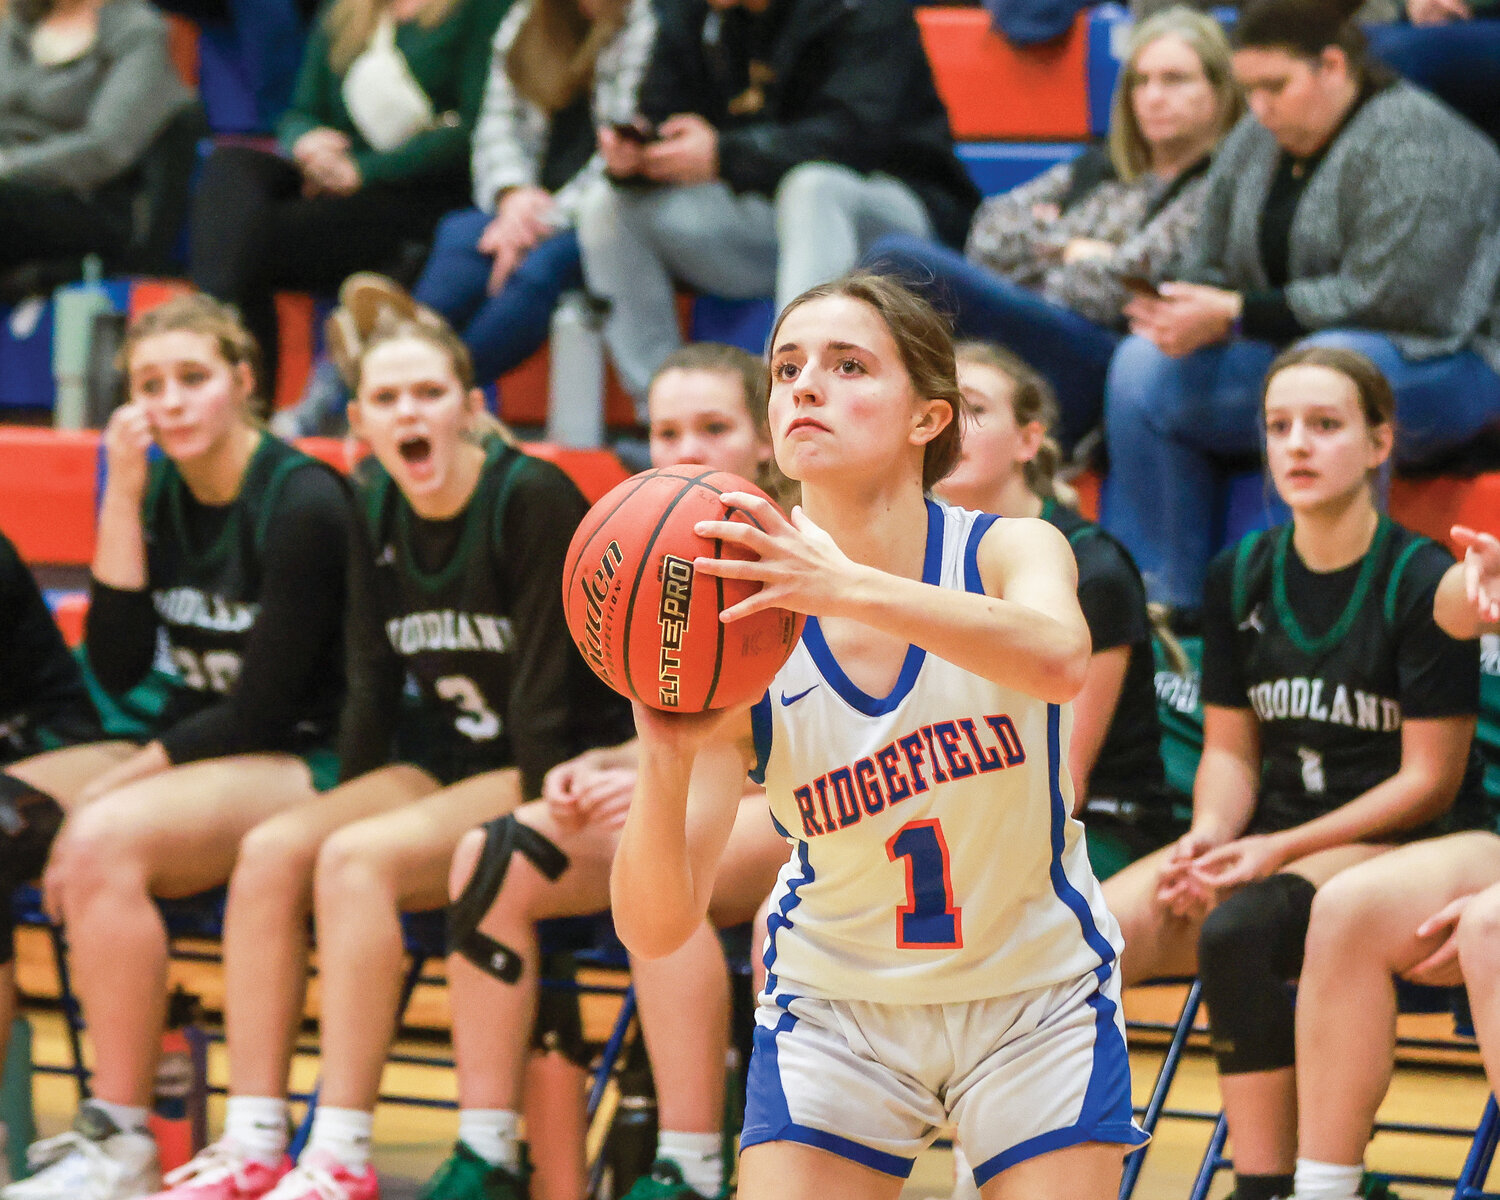 Ridgefield’s Abigail Vance loads up a 3-point shot during the Spudders’ 60-35 win over Woodland on Tuesday, Jan. 9.